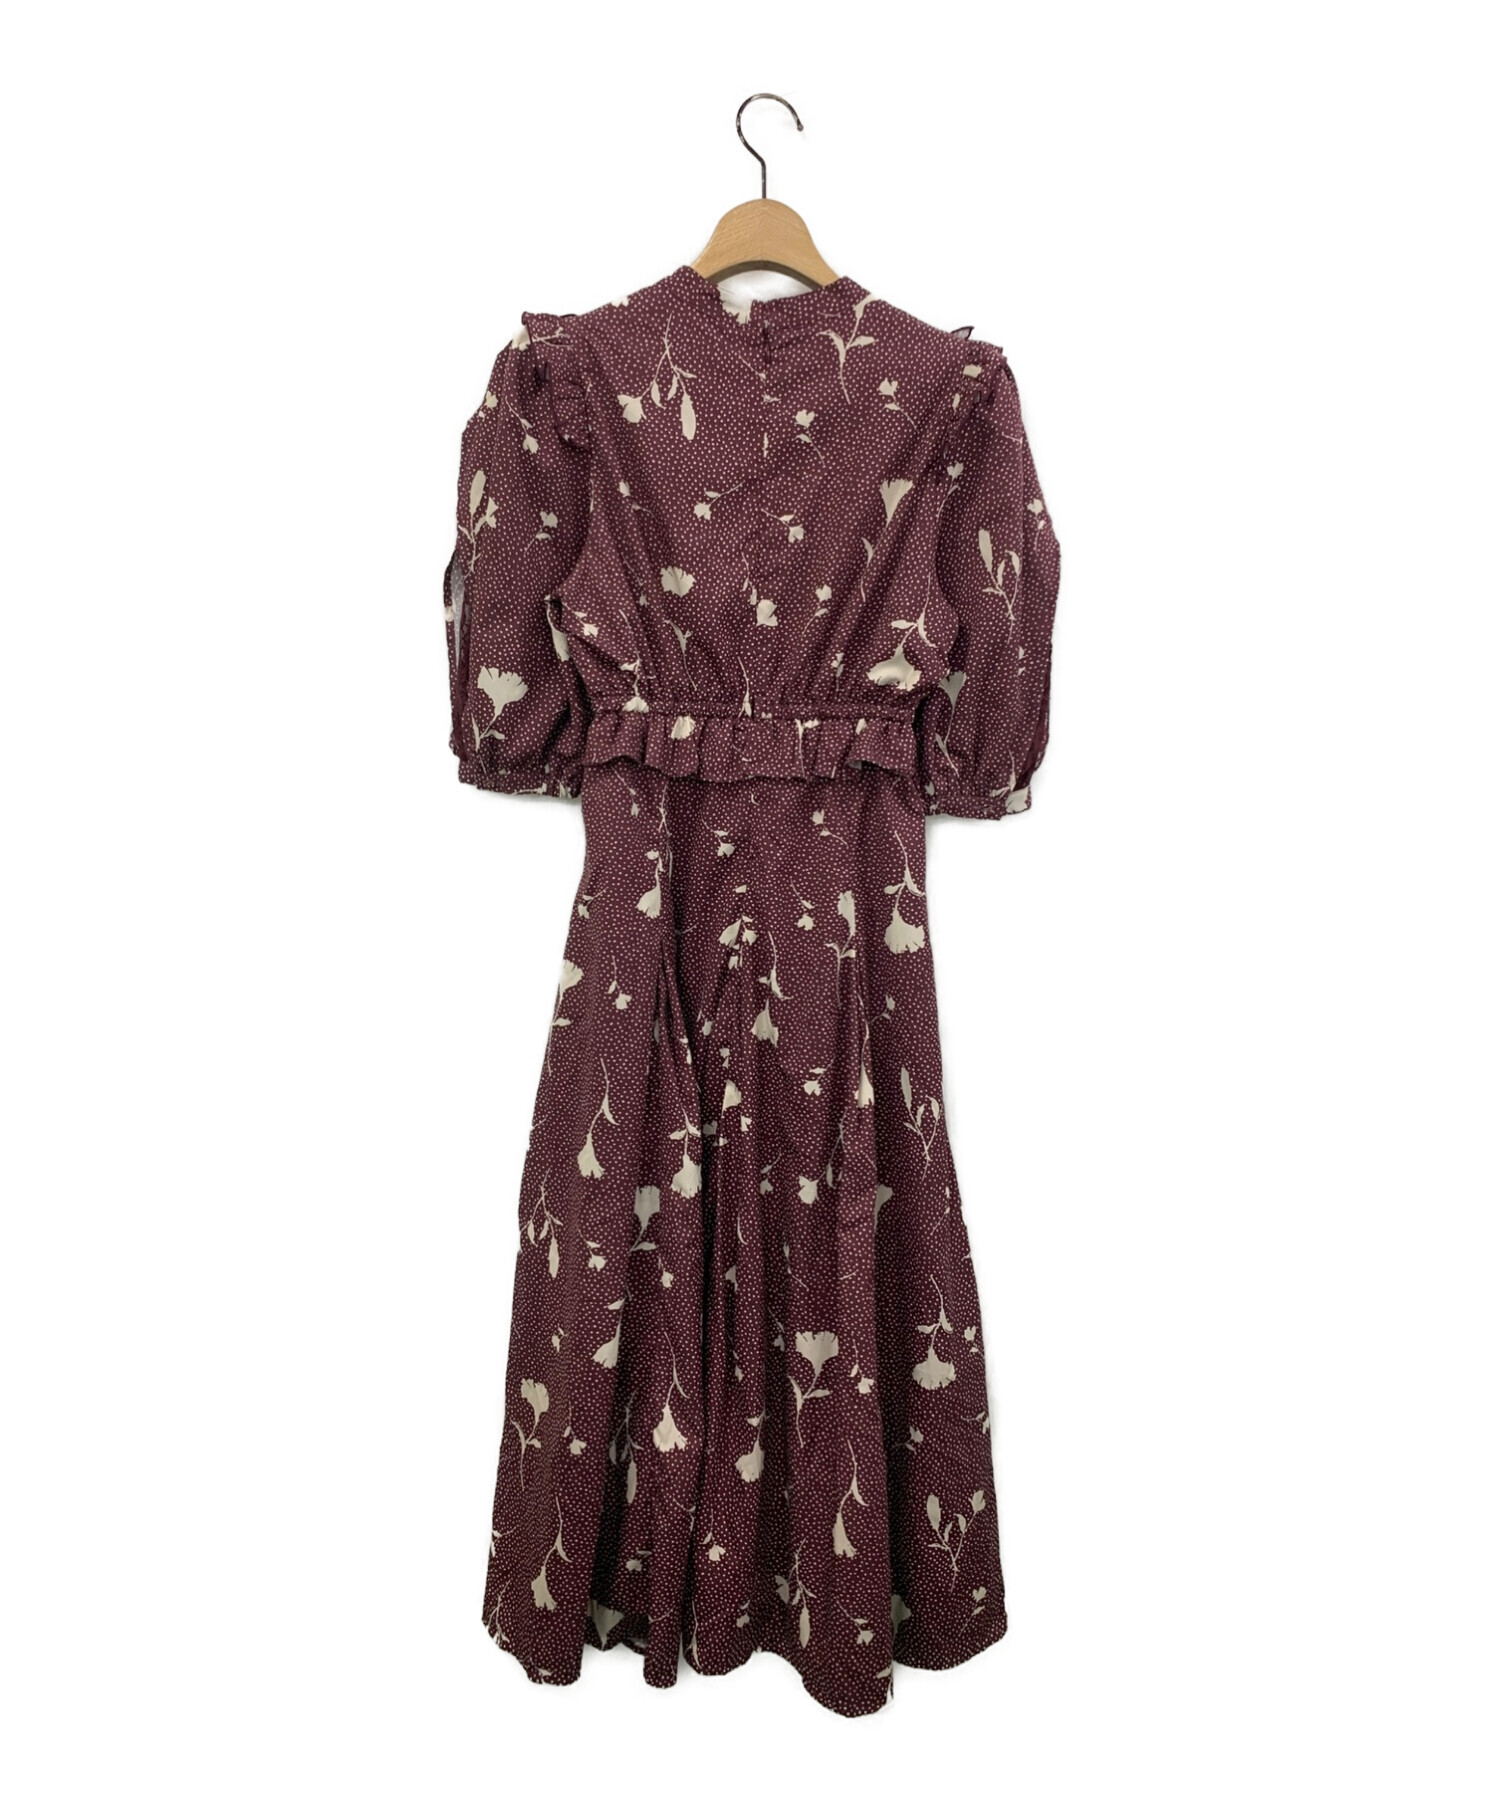 HER LIP TO (ハーリップトゥ) autumn floral lace trimmed dress ブラウンレッド サイズ:S